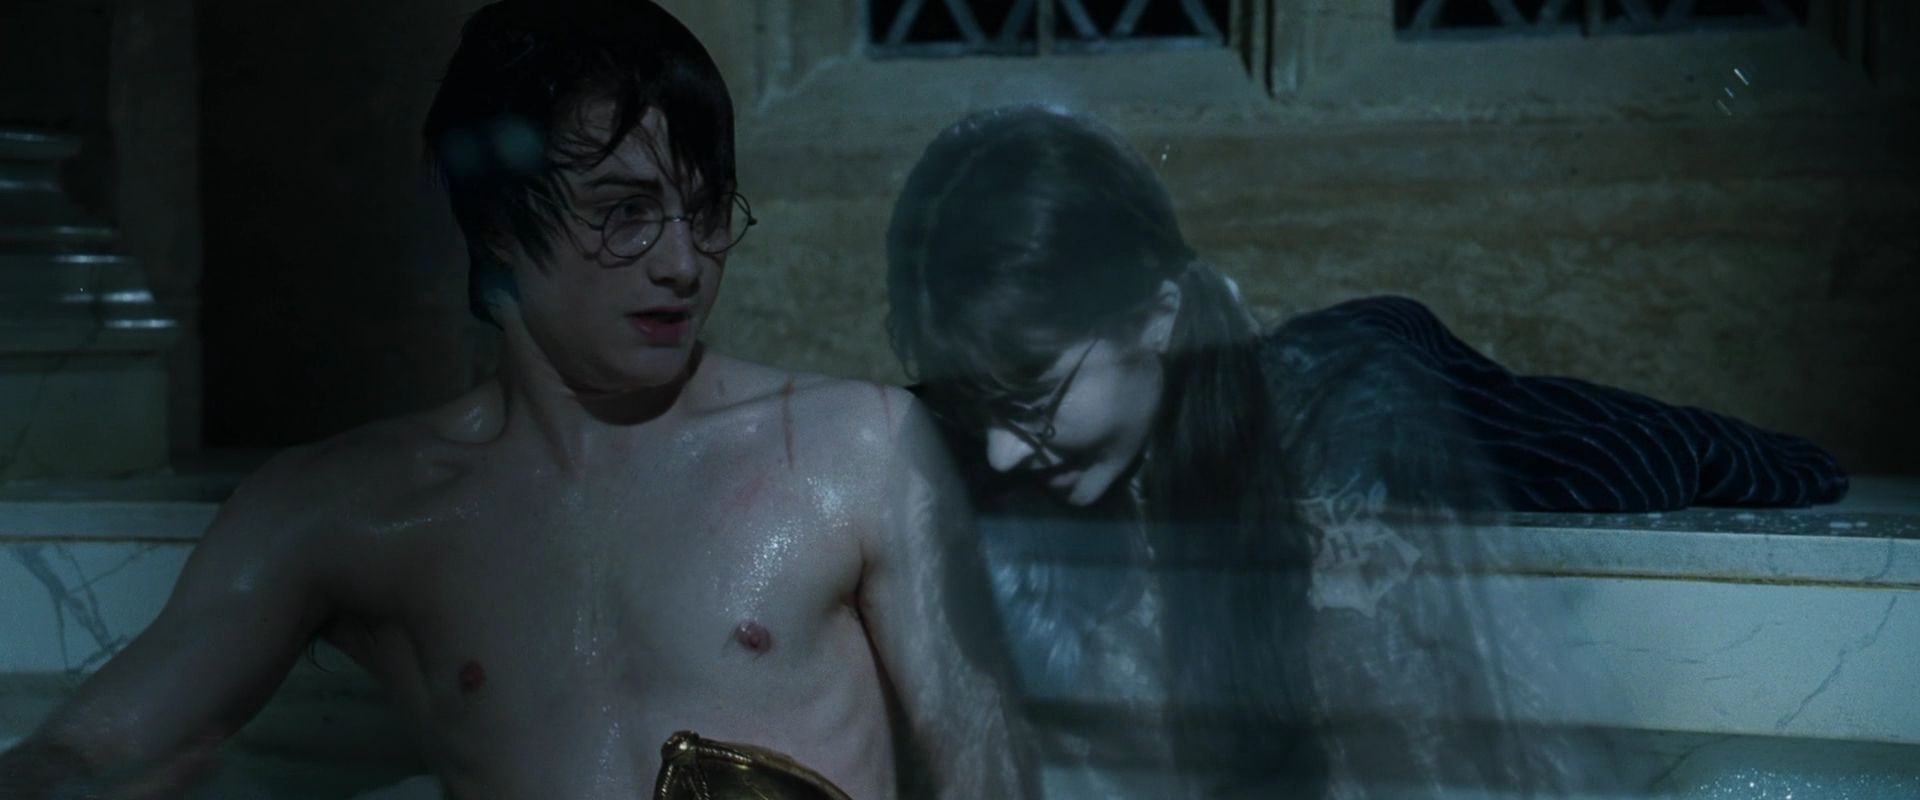 Forbidden and Sultry: Harry Potter Torrents for Grown-Ups